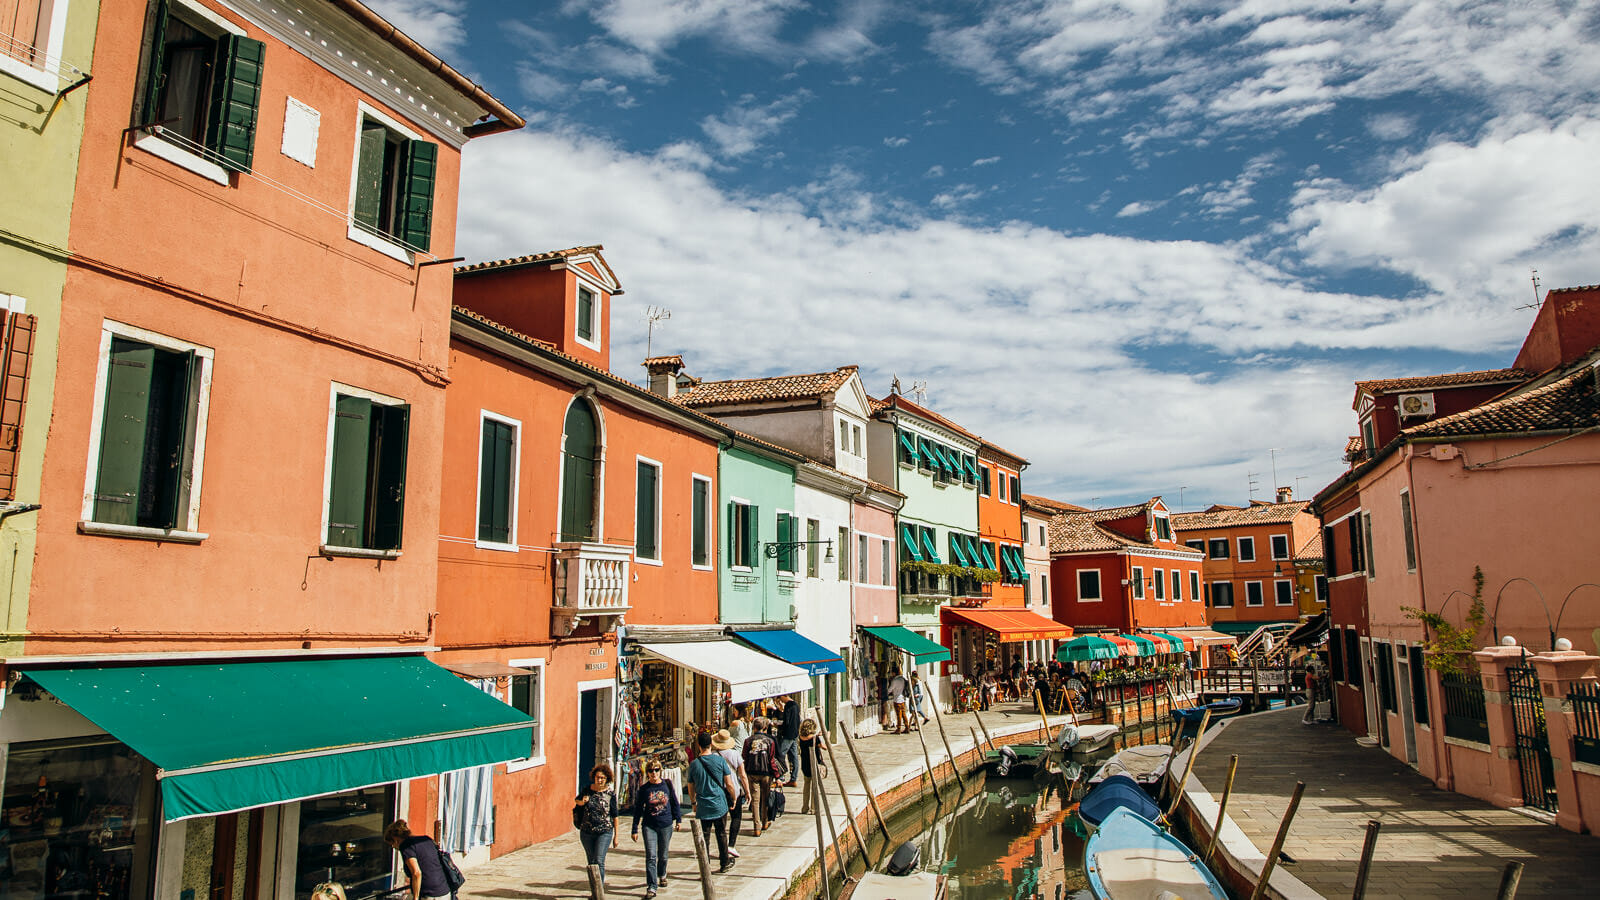 Vibrantly painted houses along the canal in Burano, Venice